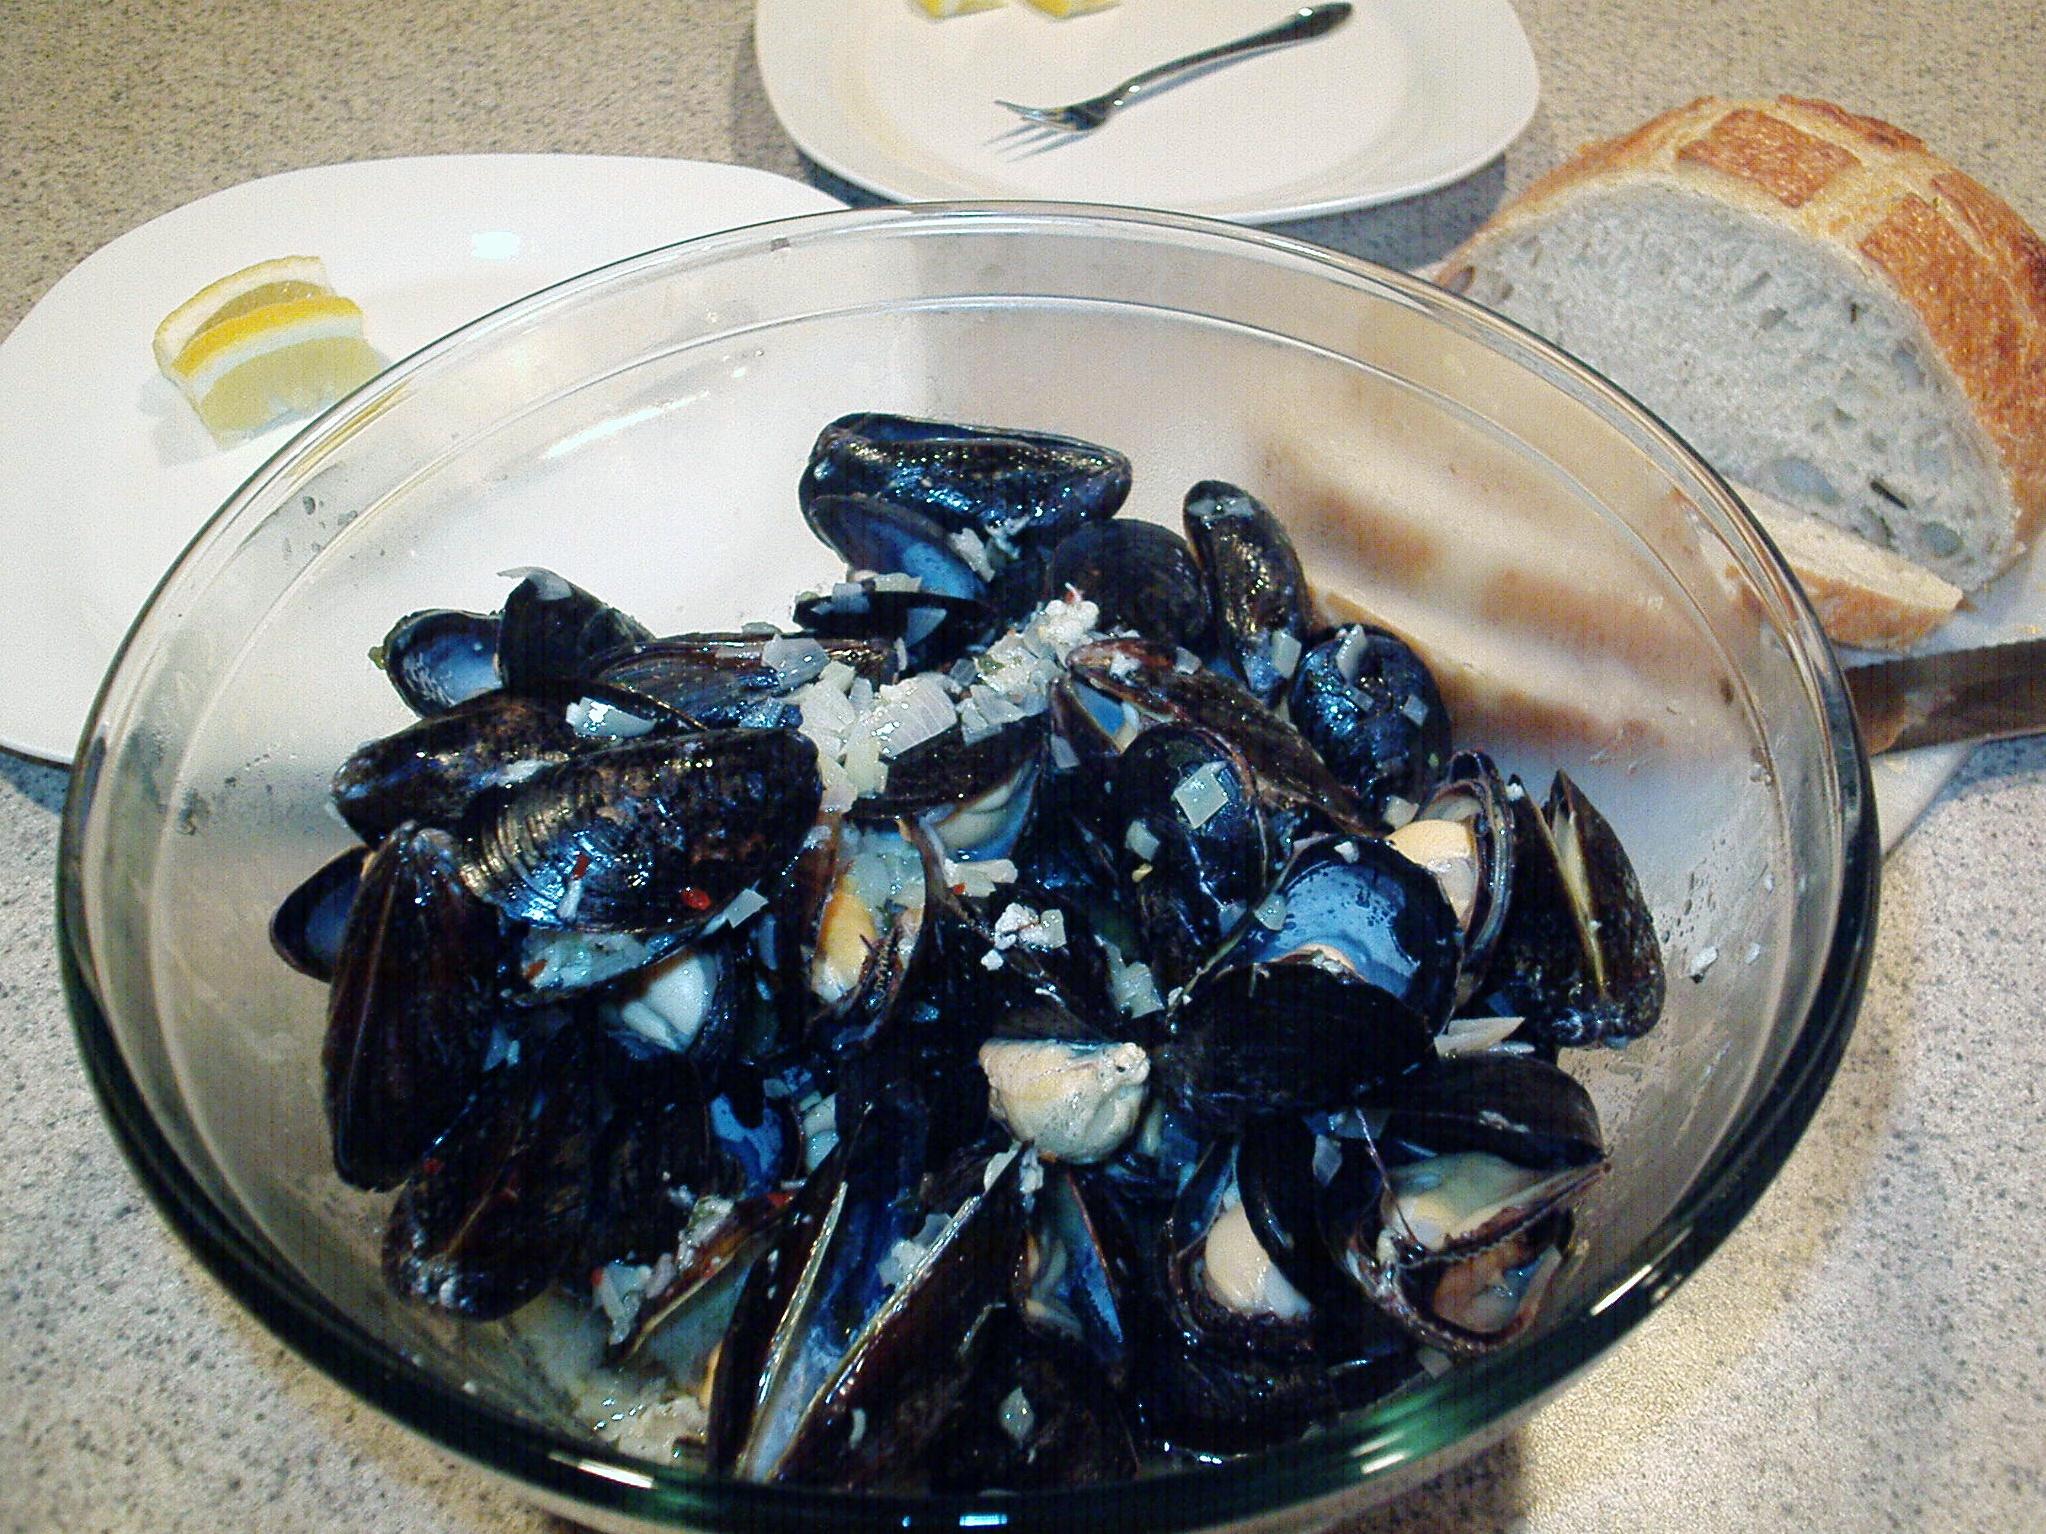  Dip your crusty bread into this savory and delicious mussels in wine broth!